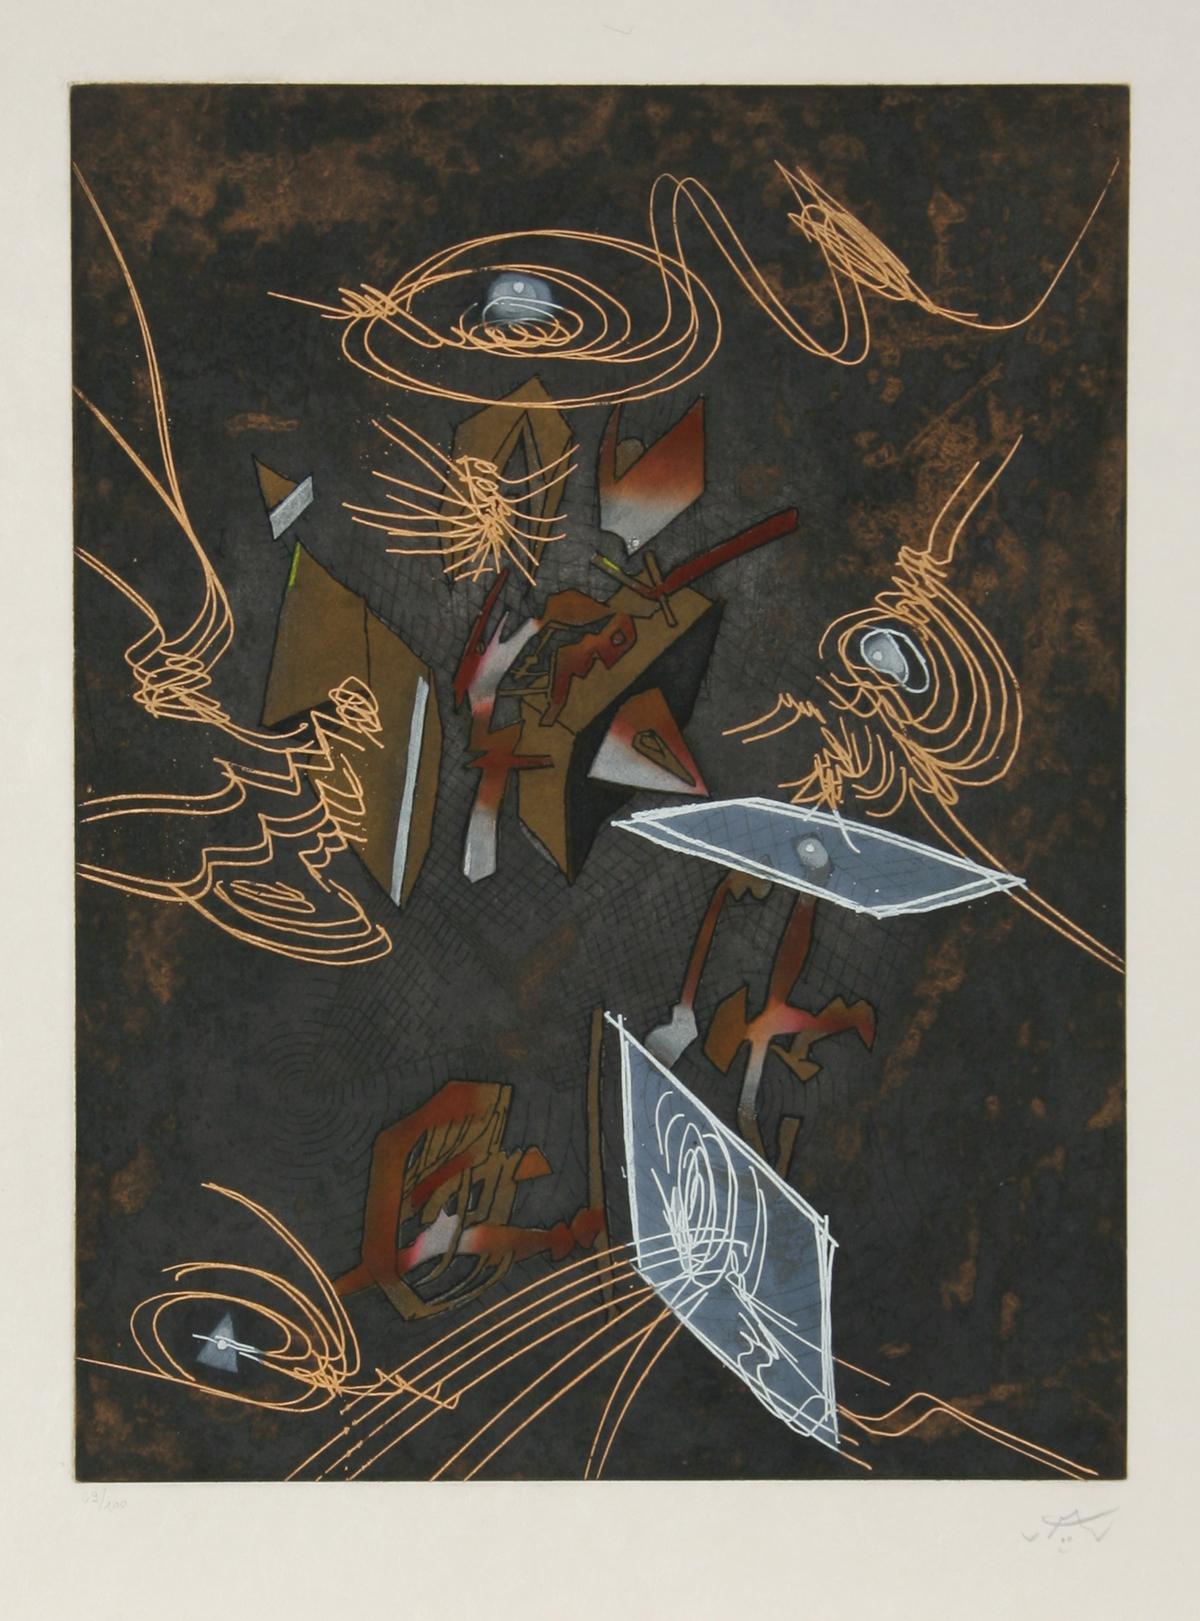 Artist: Roberto Matta (Chilean, 1911 - 2002)
Title: Untitled 9
Portfolio: Hom'mere V - N'ous
Date: 1985
Medium: Etching and aquatint, signed and numbered in pencil
Edition: 29/100
Image size: 19.5 x 15 inches
Paper size: 26.5 x 20.5 inches

